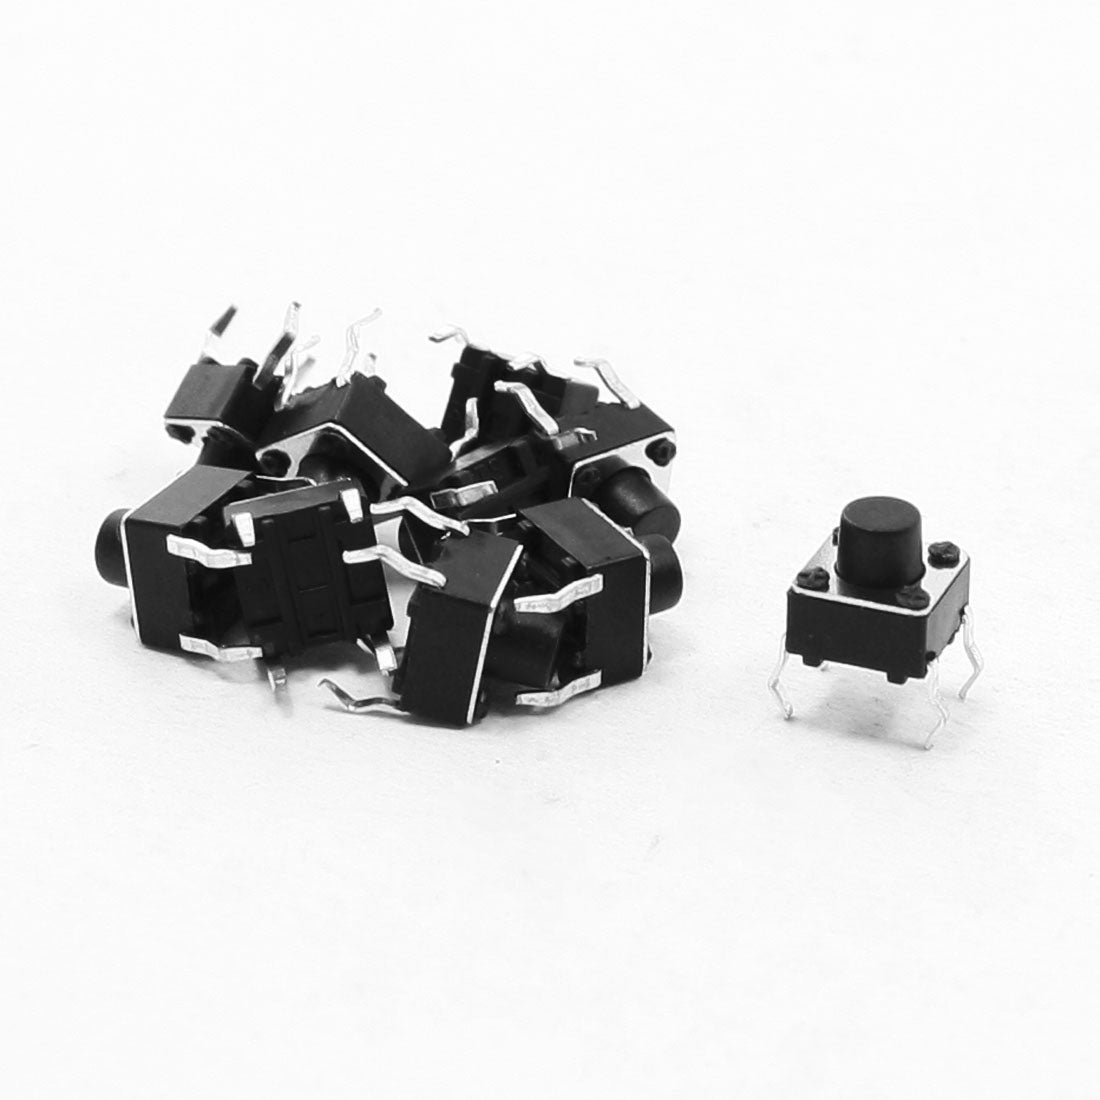 uxcell Uxcell 10 Pcs 6x6x6mm 4 Pins DIP PCB Momentary Tactile Tact Push Button Switch